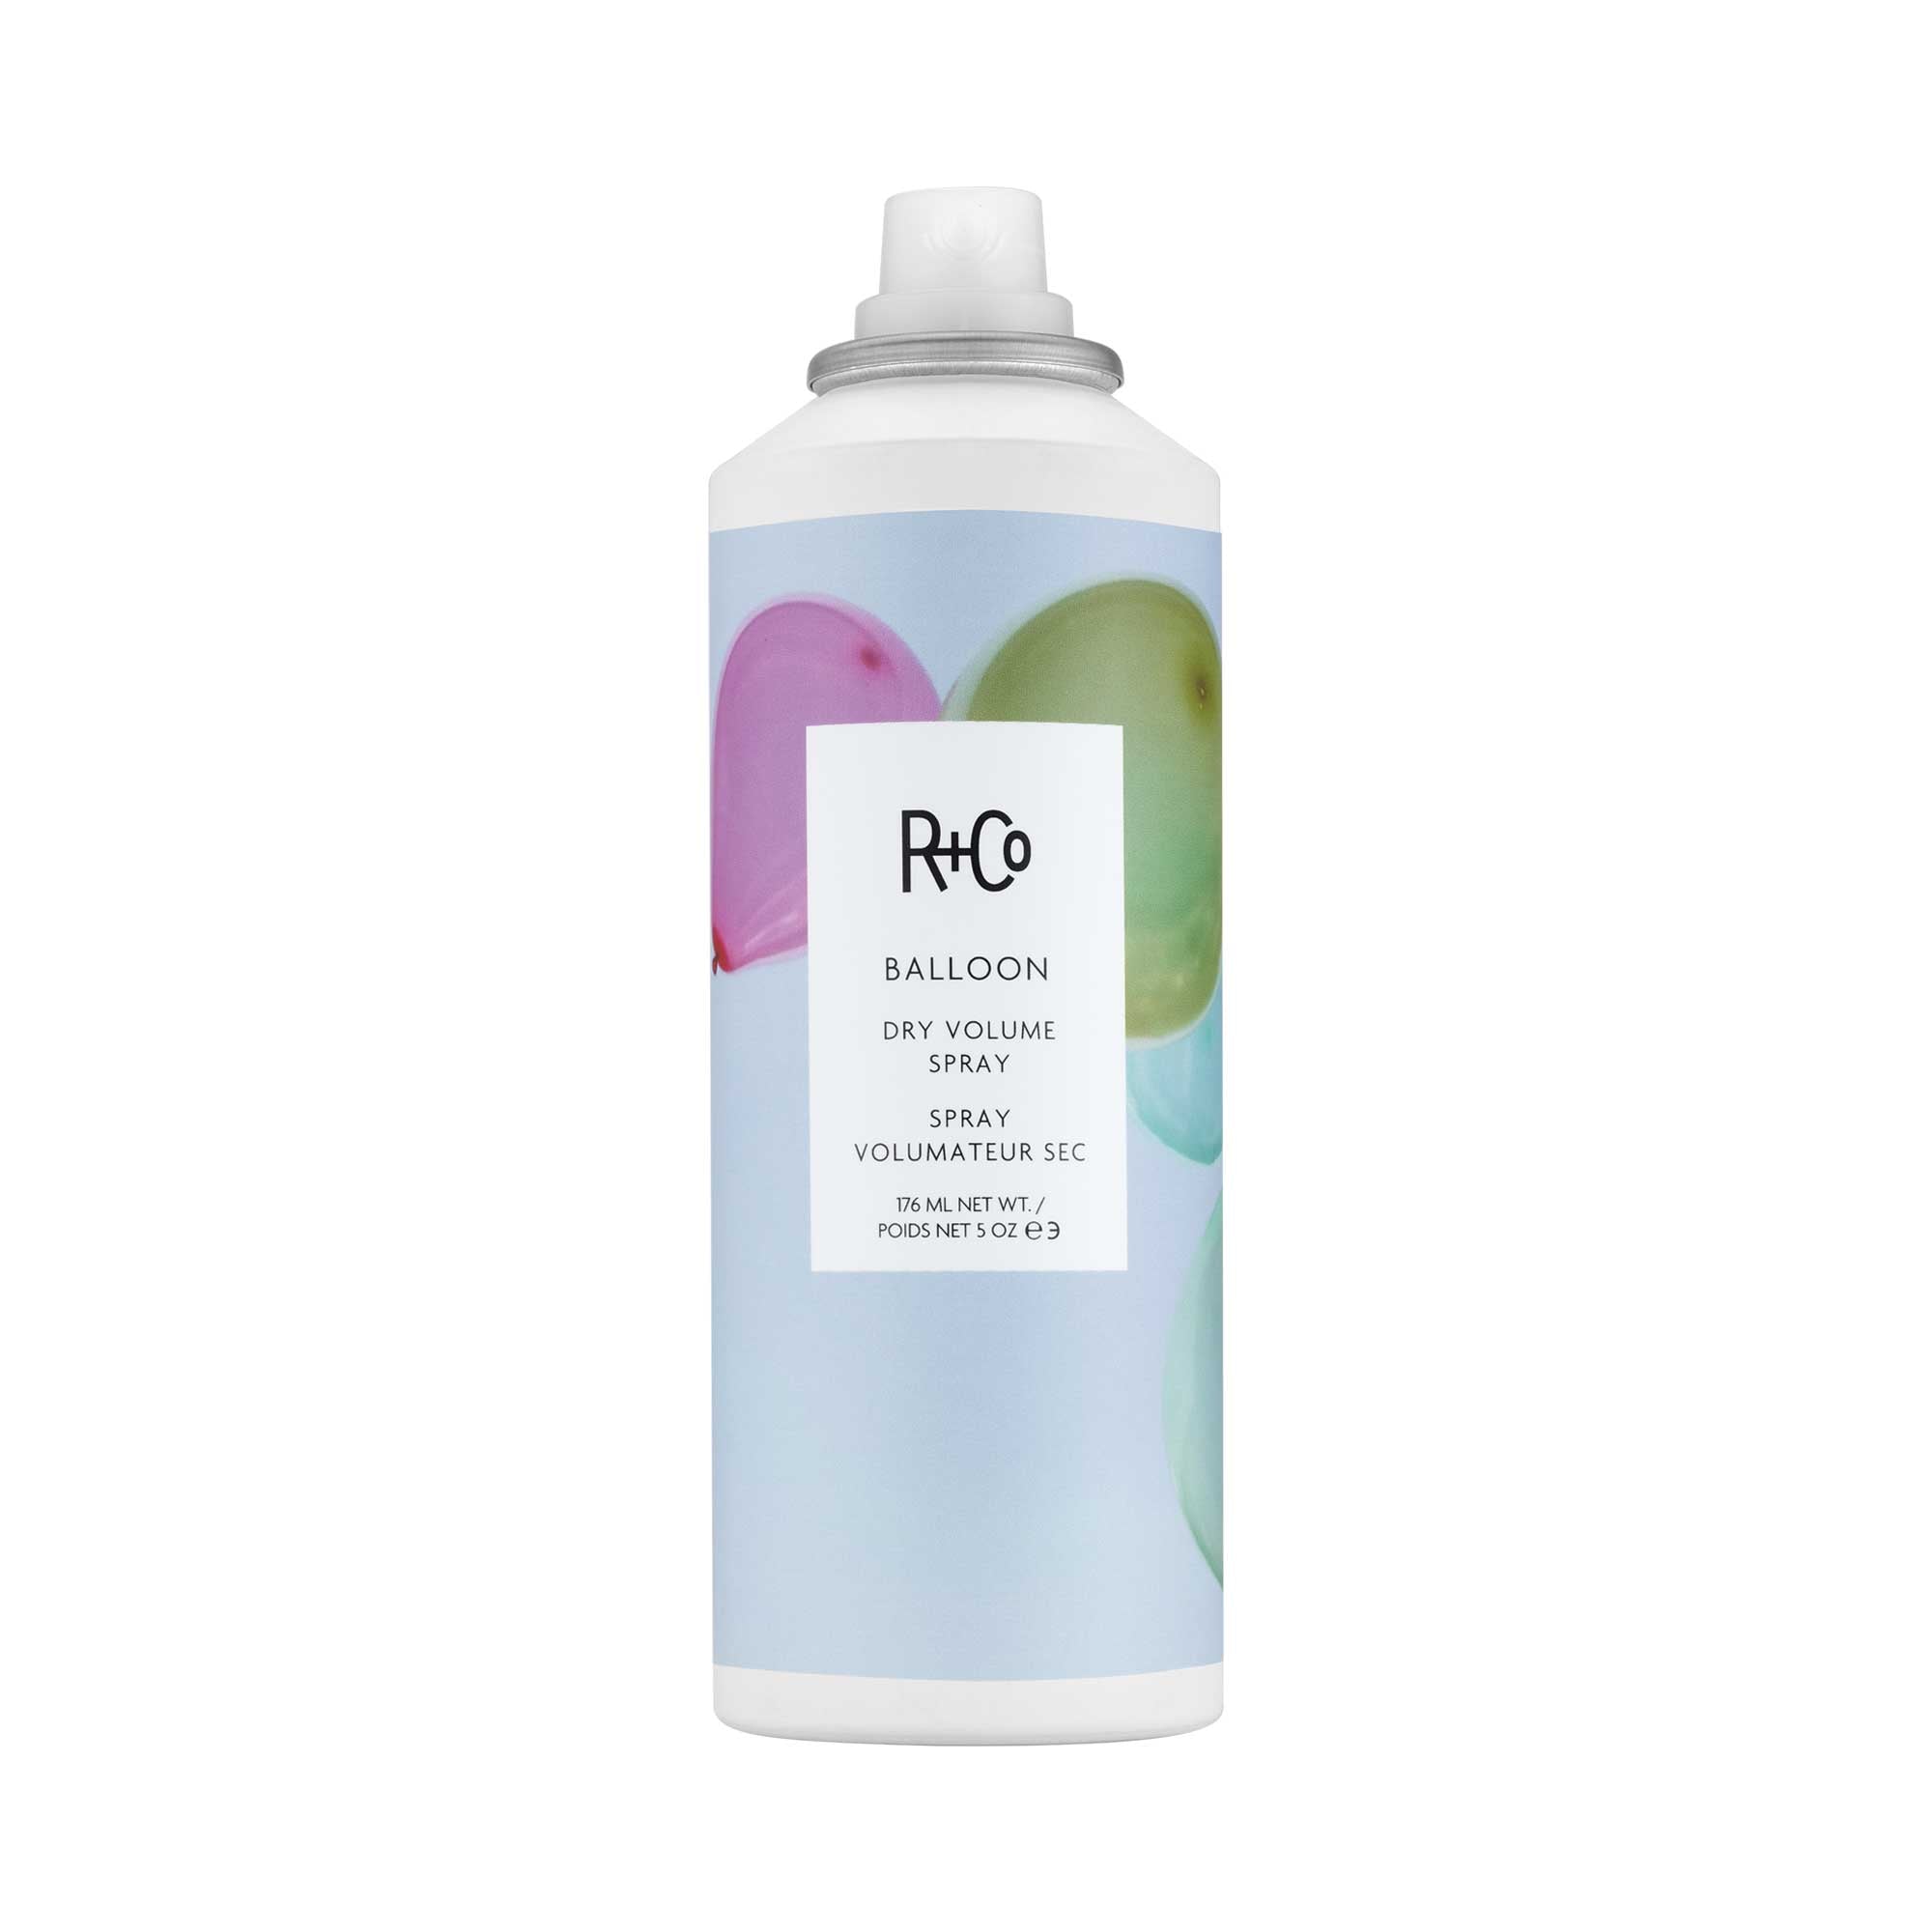 add instant volume and texture with R+Co Balloon dry volume spray